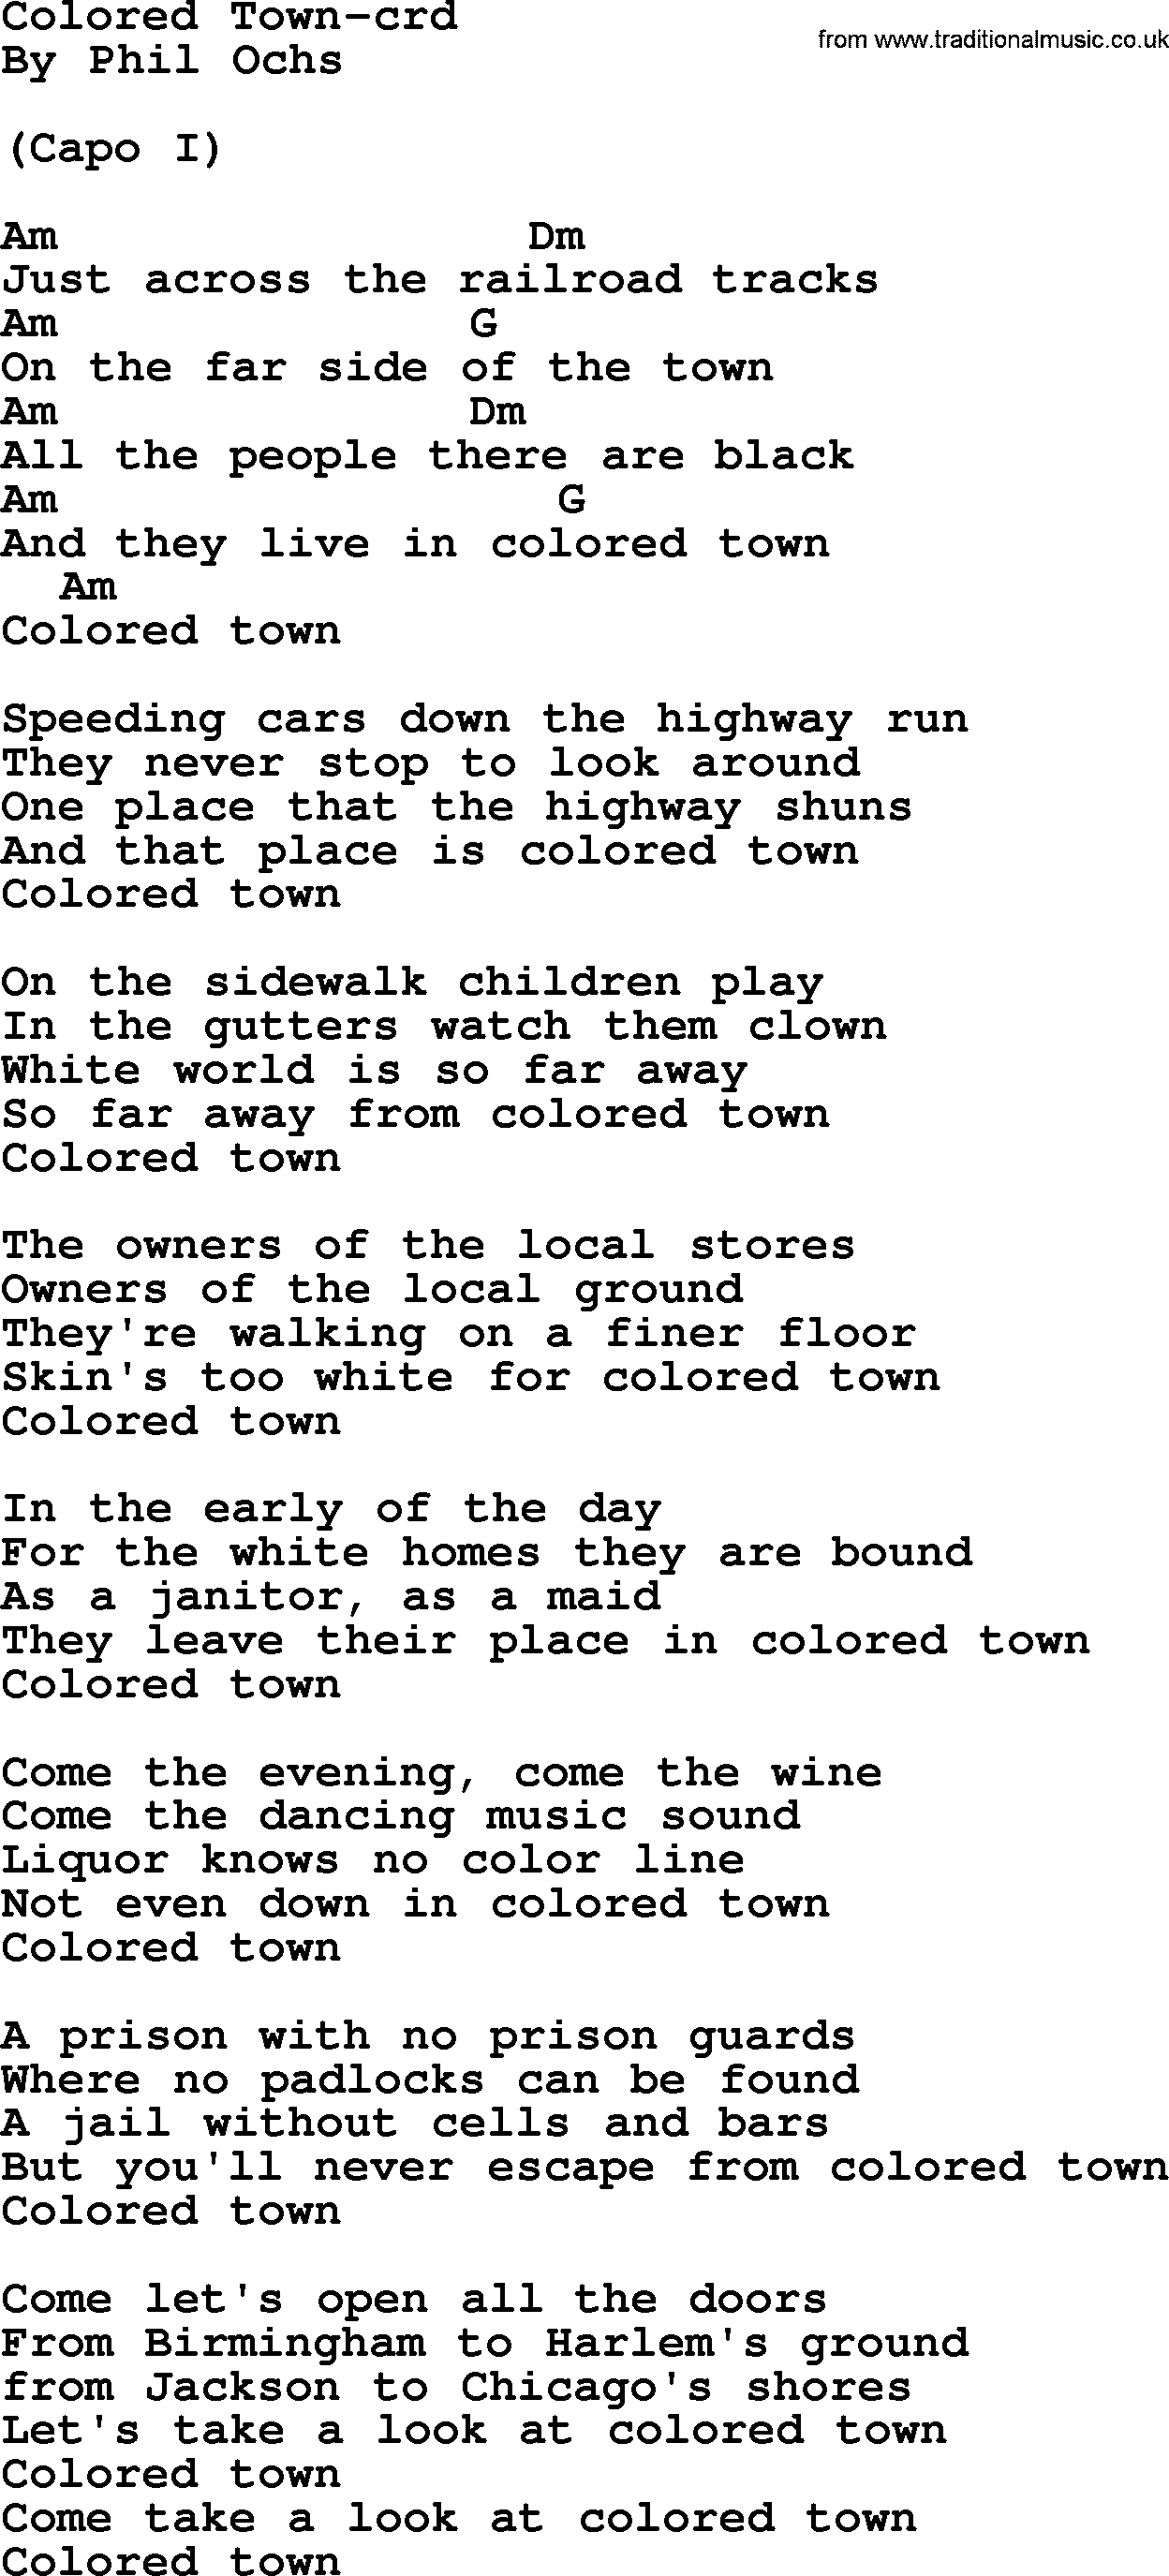 Phil Ochs song Colored Town- by Phil Ochs, lyrics and chords